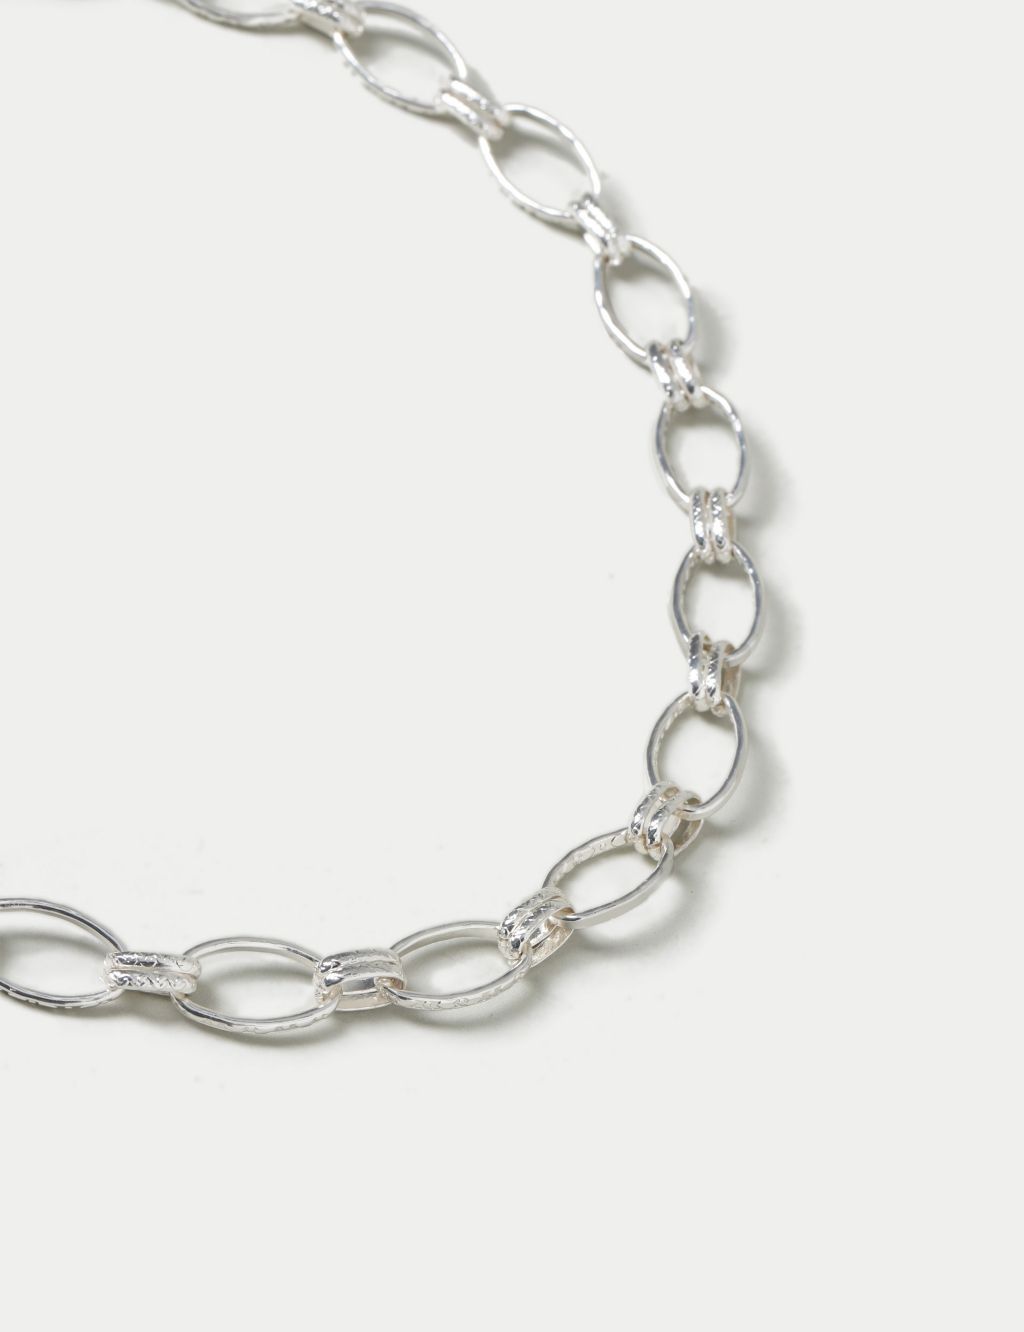 Silver Tone Beaten Link Chain Necklace image 2